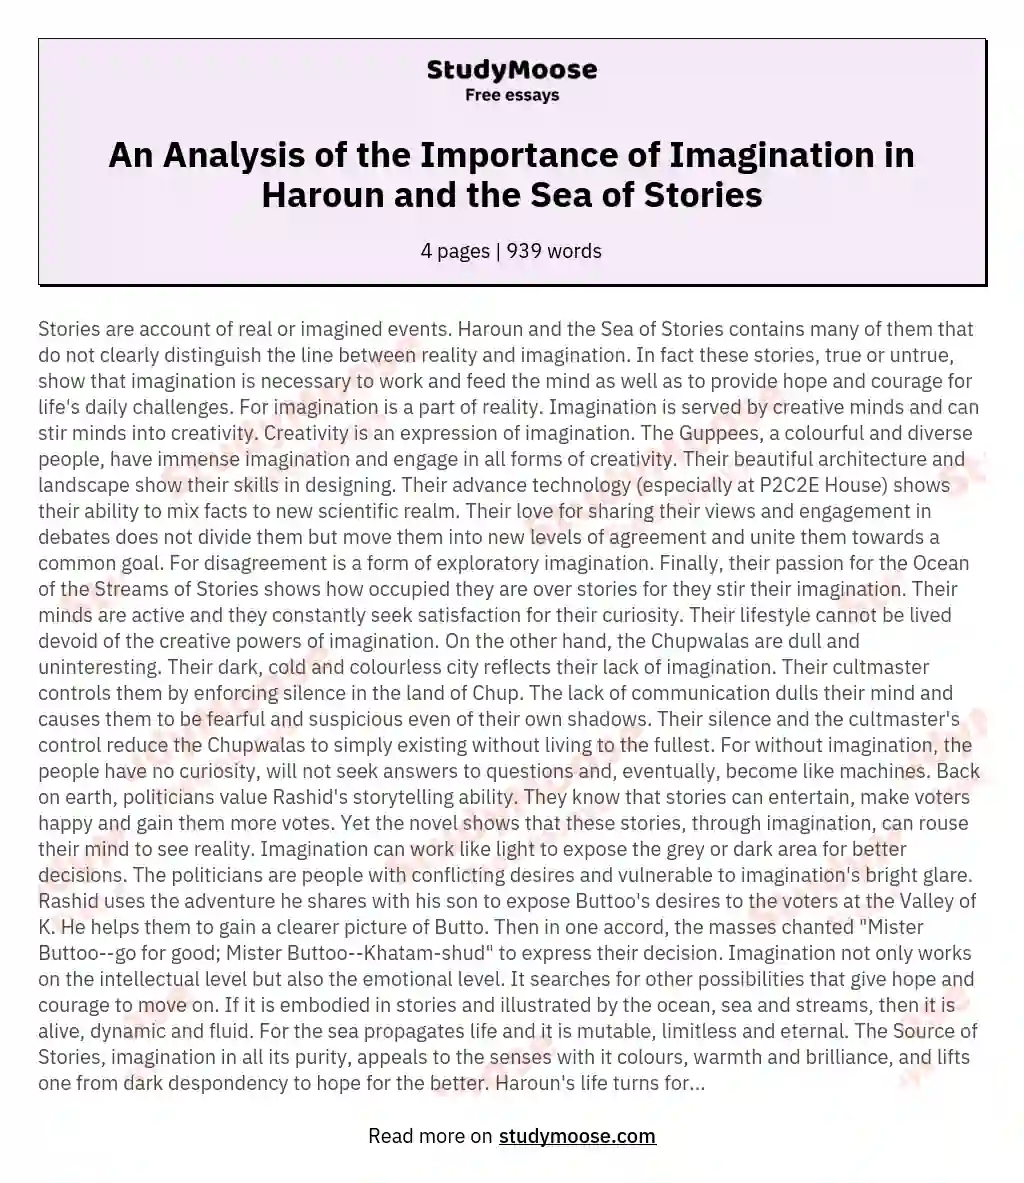 An Analysis of the Importance of Imagination in Haroun and the Sea of Stories essay